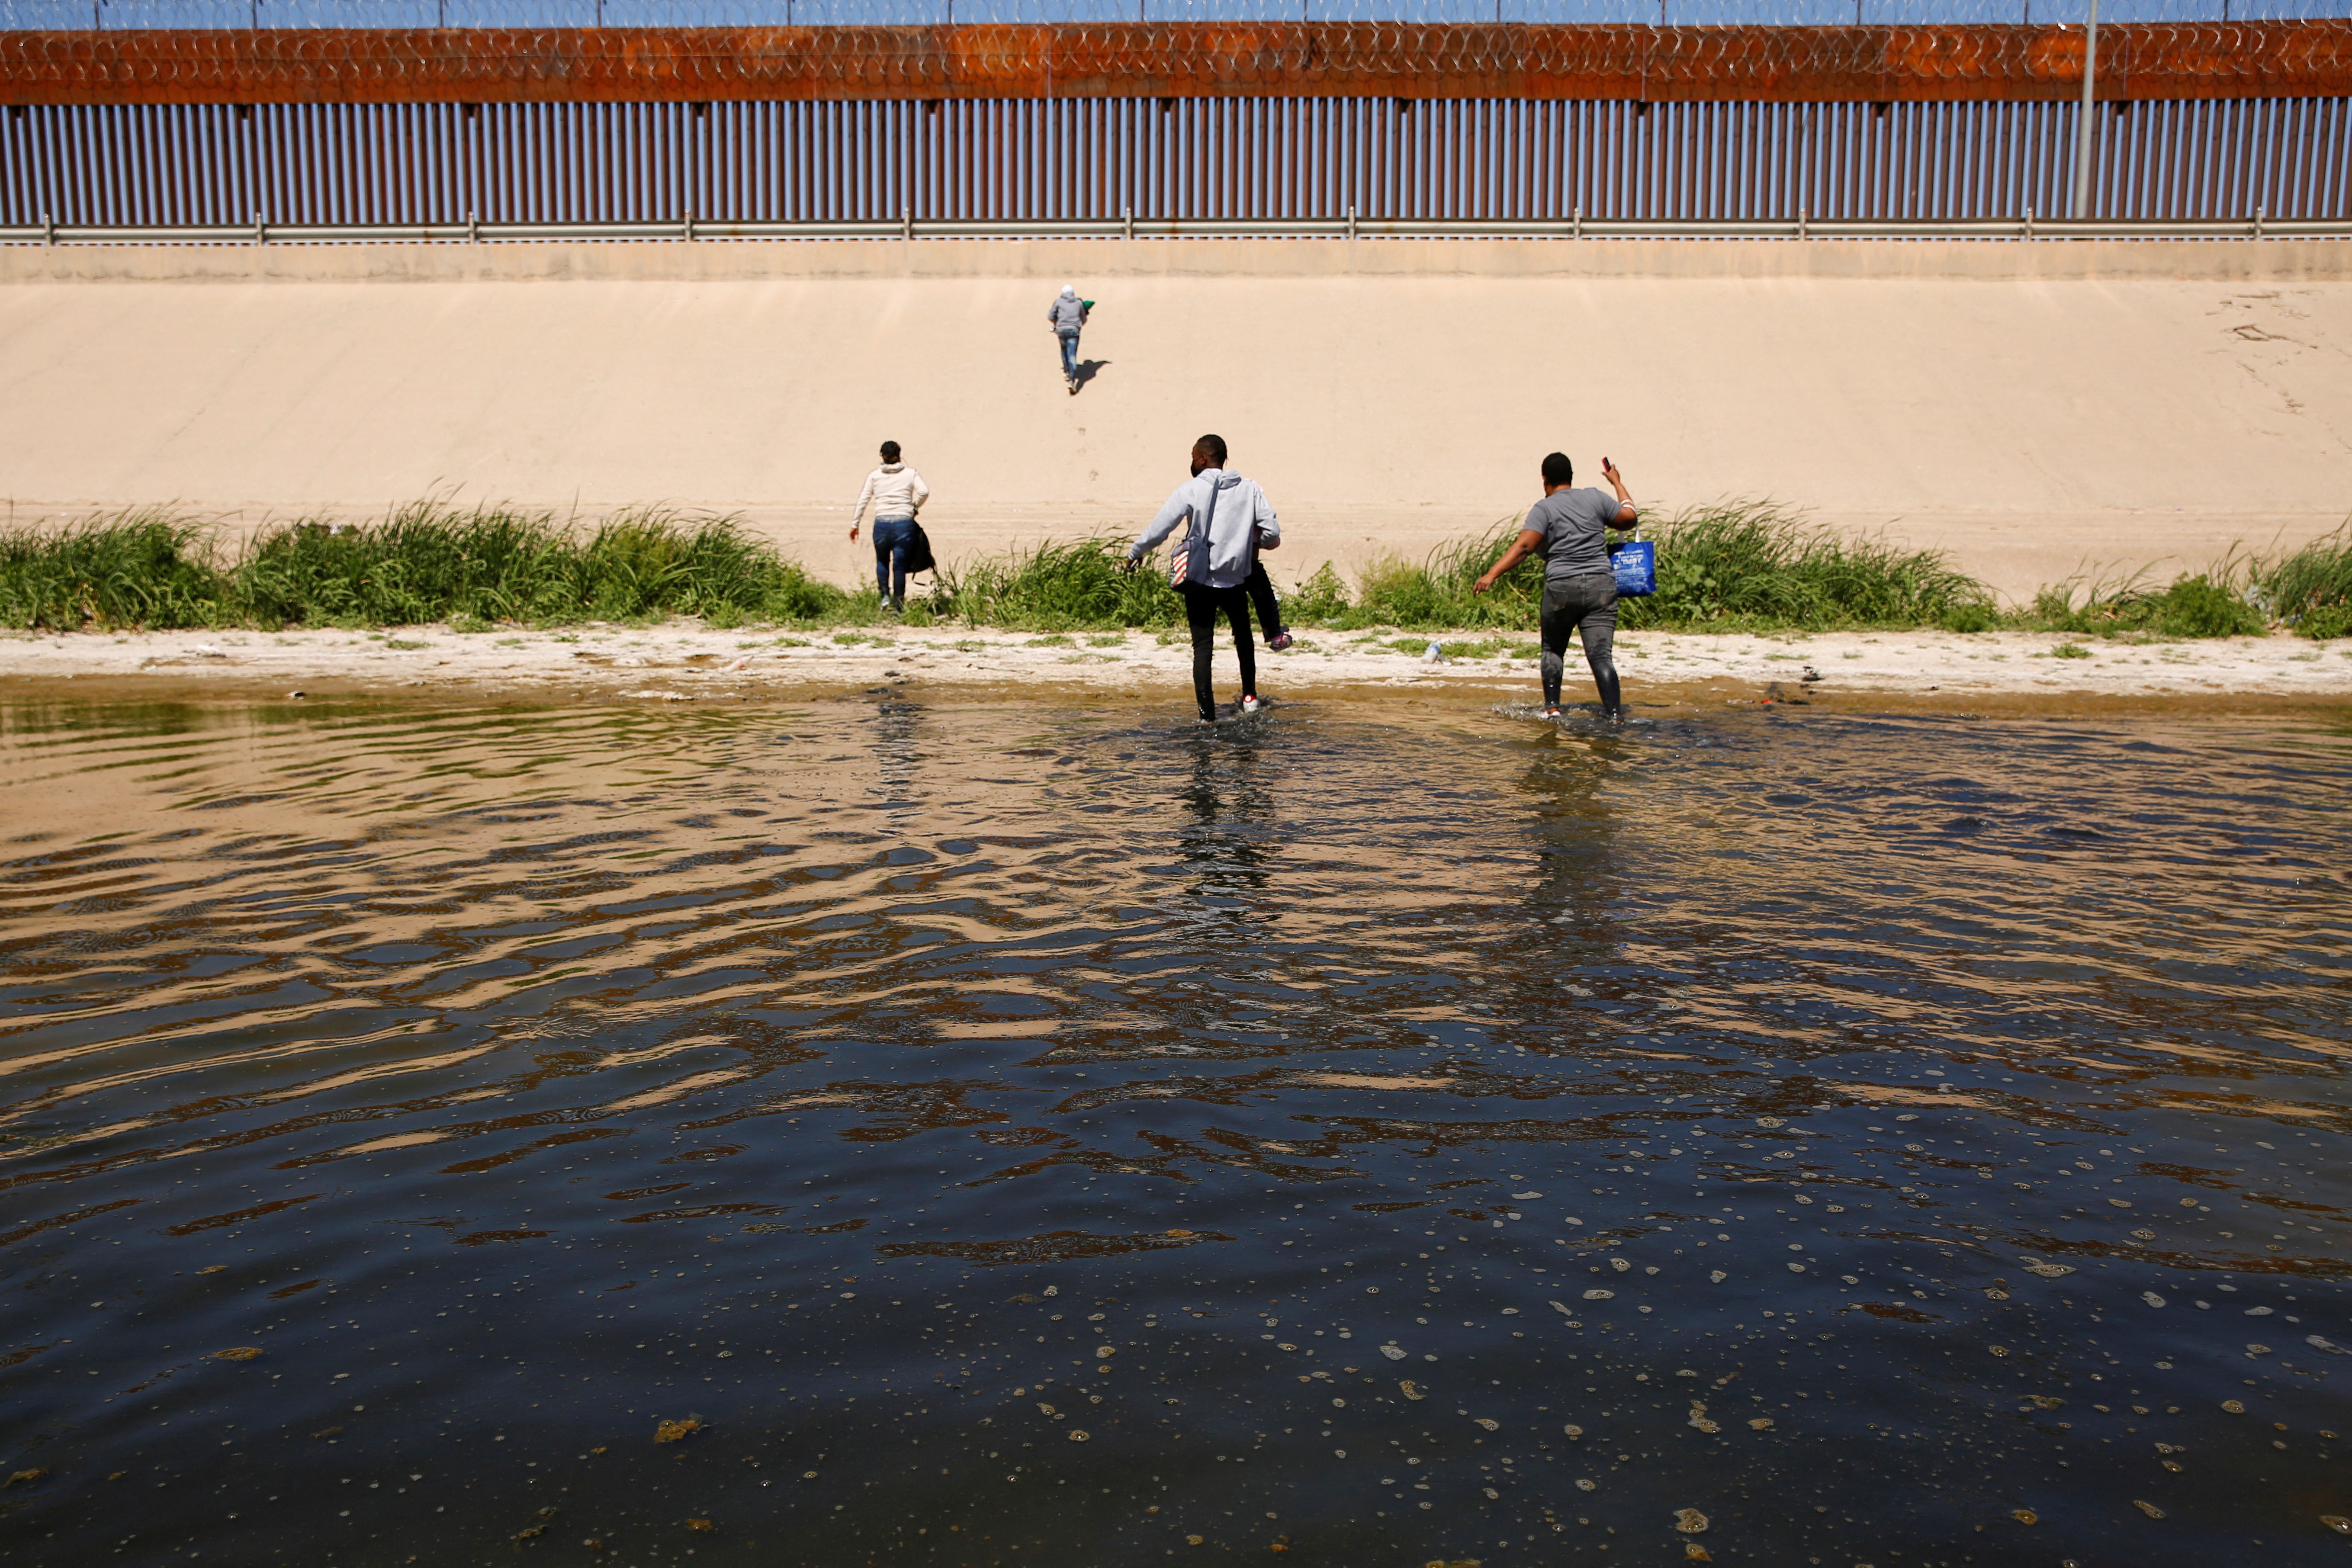 FILE PHOTO - Asylum-seeking migrants walk out of the Rio Bravo river after crossing it, in El Paso